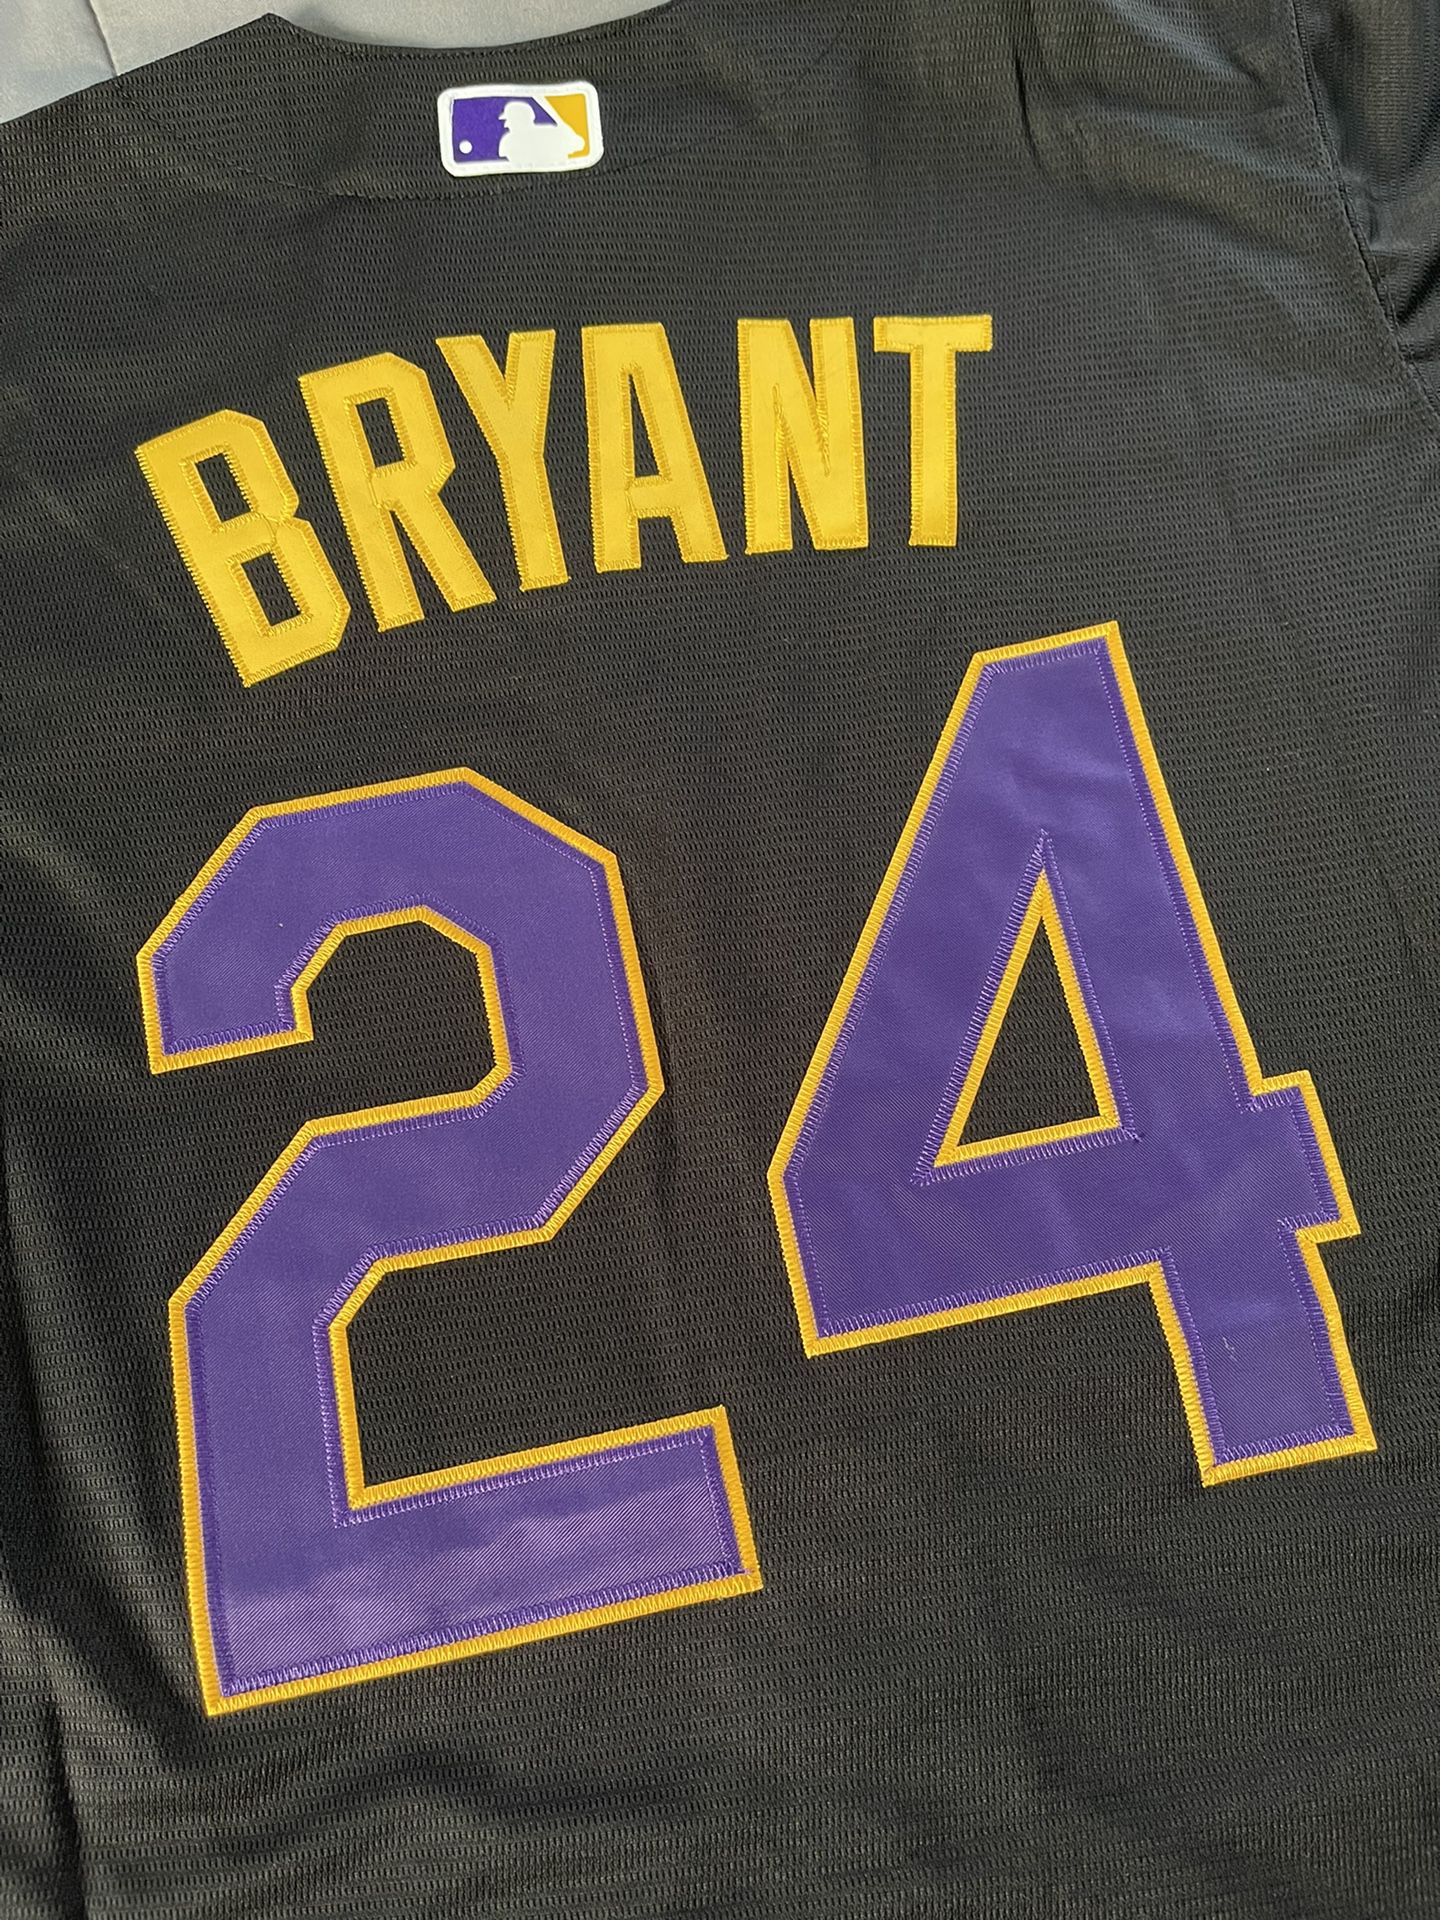 Kobe Bryant Jersey for Sale in Montclair, CA - OfferUp